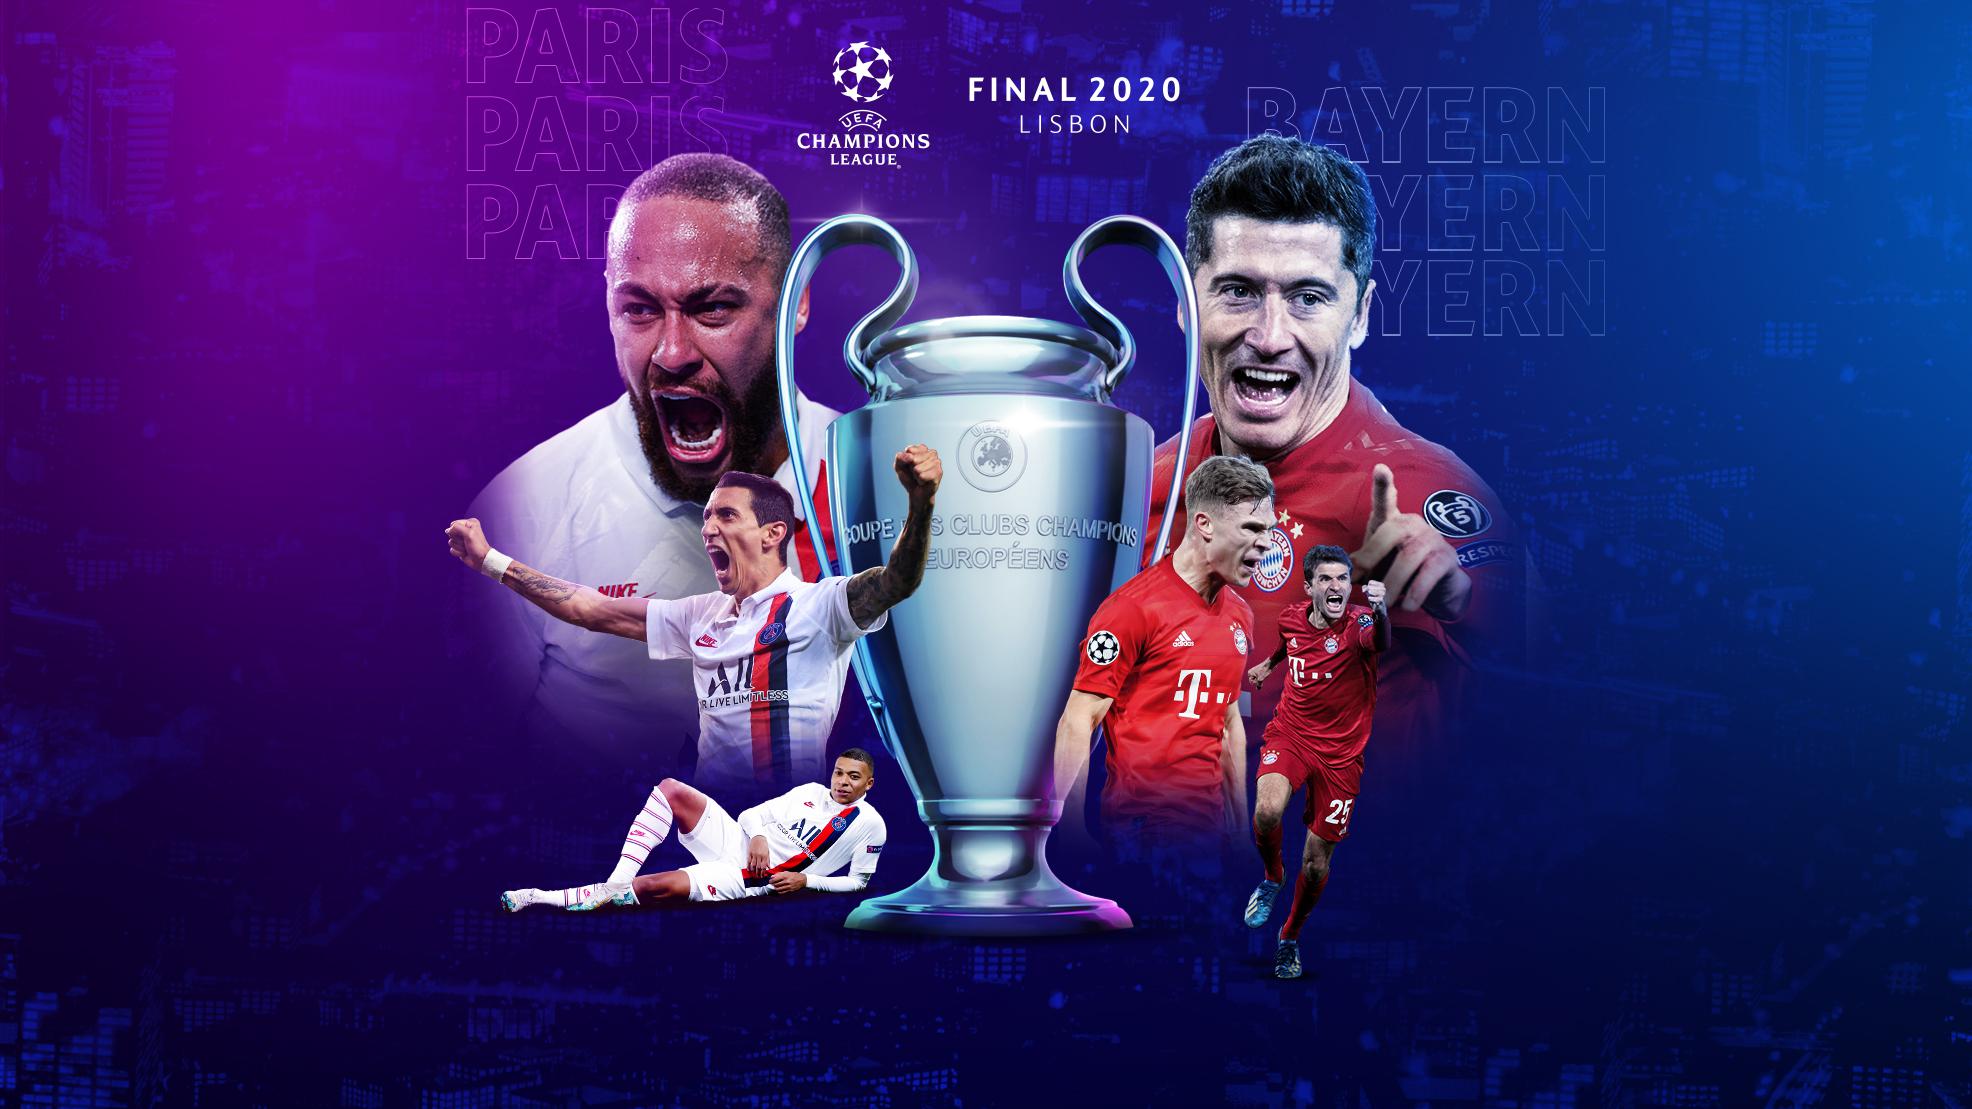 2020 Champions League final: when and where, UEFA Champions League